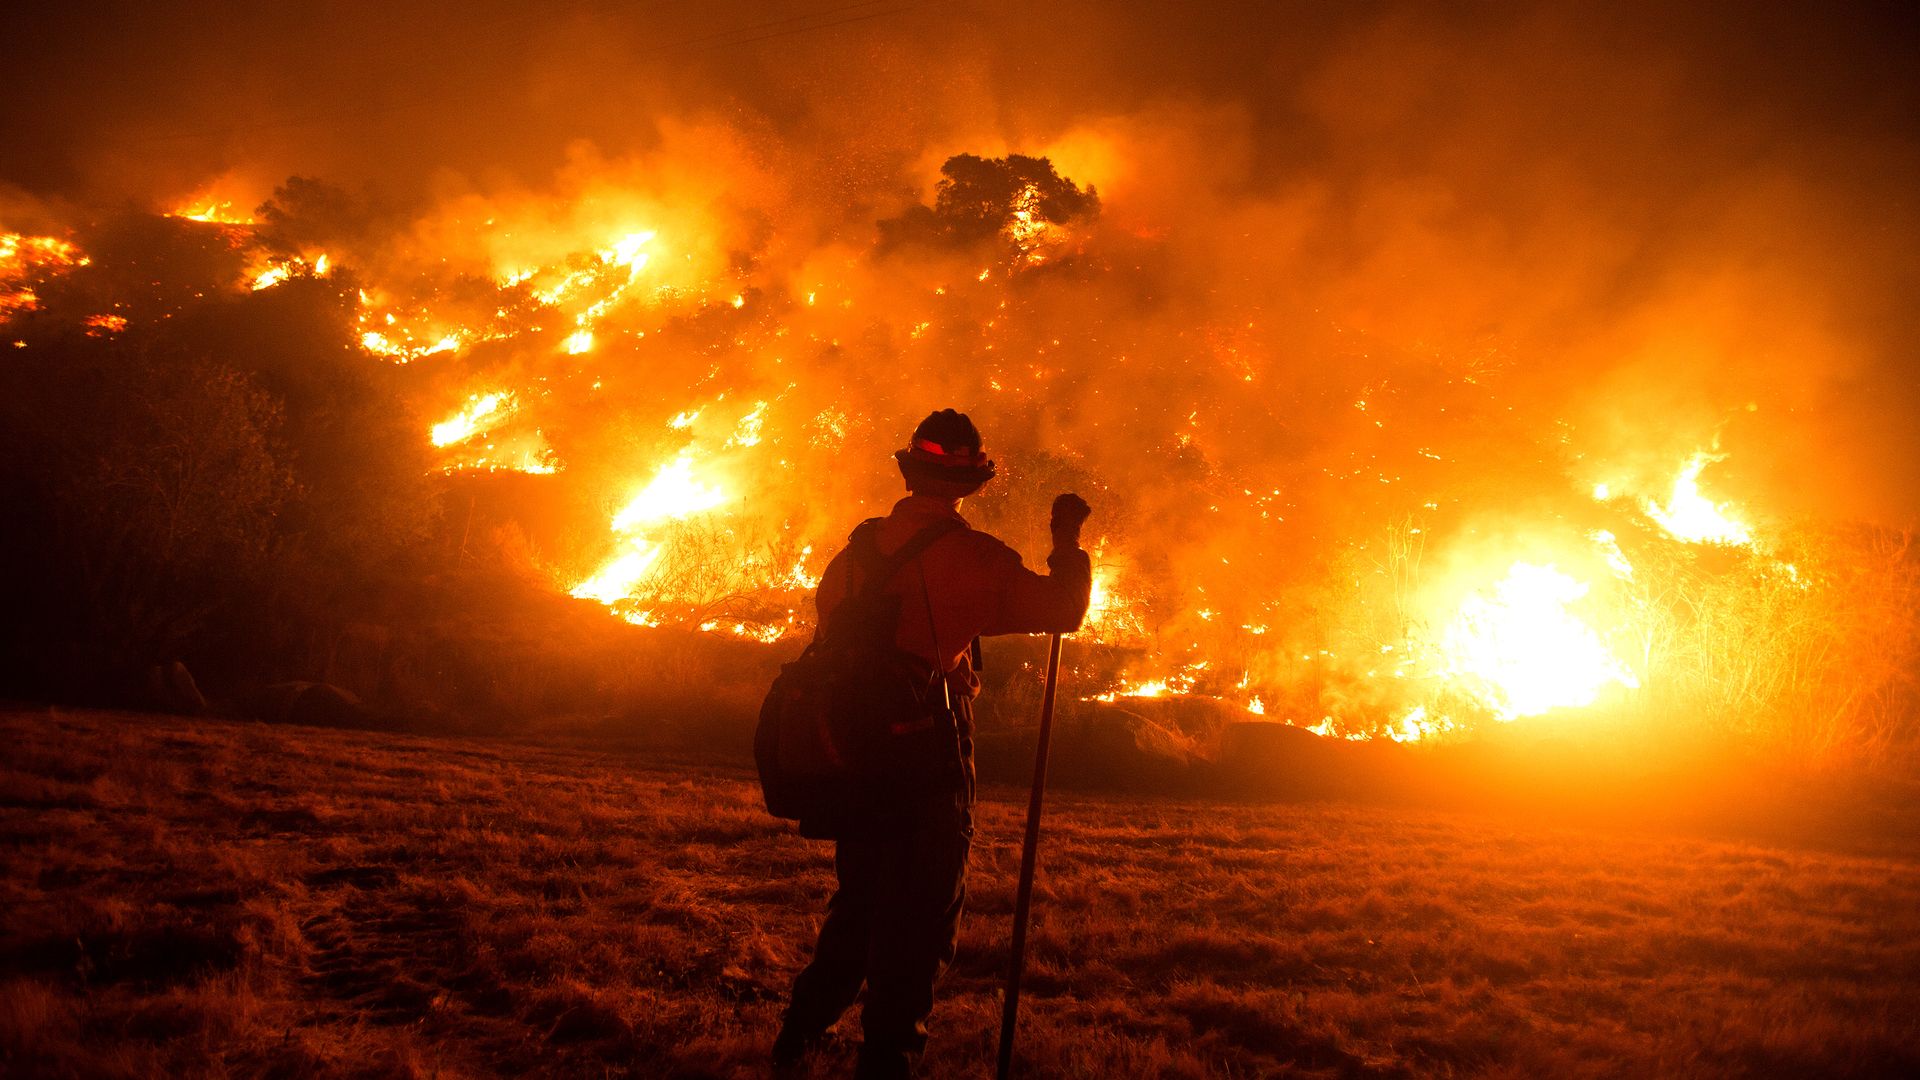 A firefighter works at the scene of the Bobcat Fire burning on hillsides near Monrovia Canyon Park in Monrovia, California on September 15